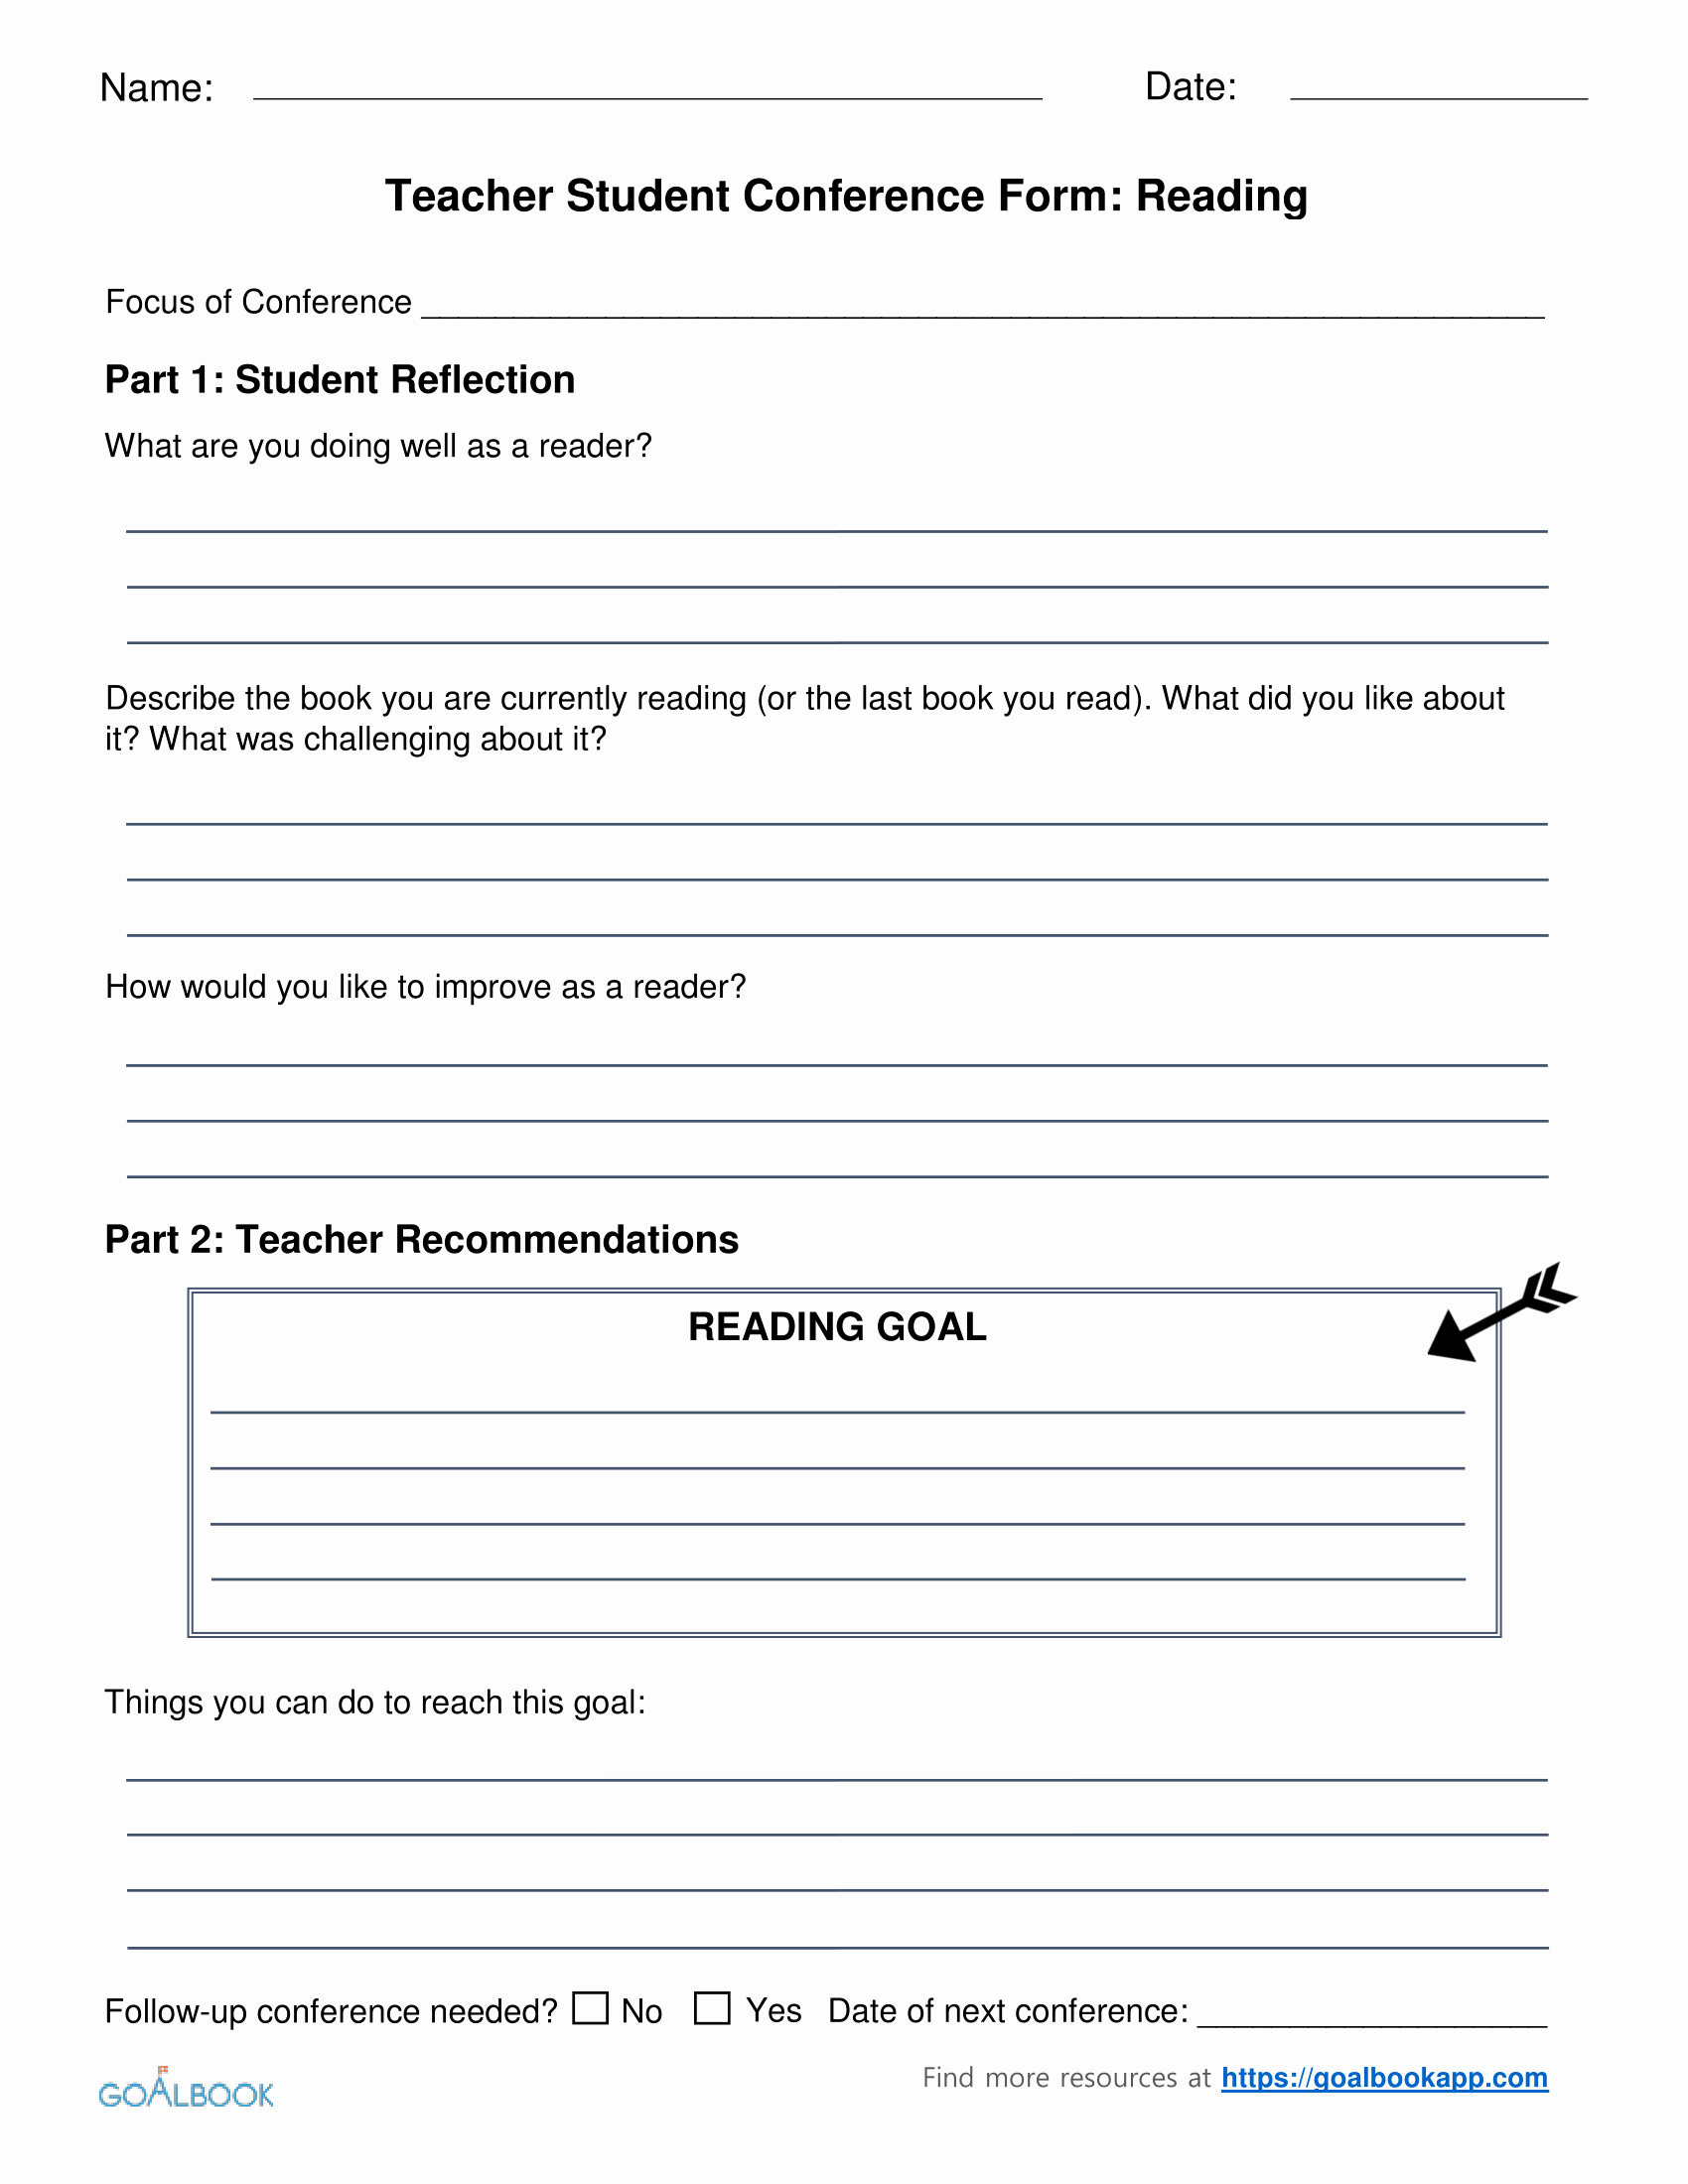 Conference Notes Template for Teachers Beautiful Guided Reading Conference forms for Teachers Reading